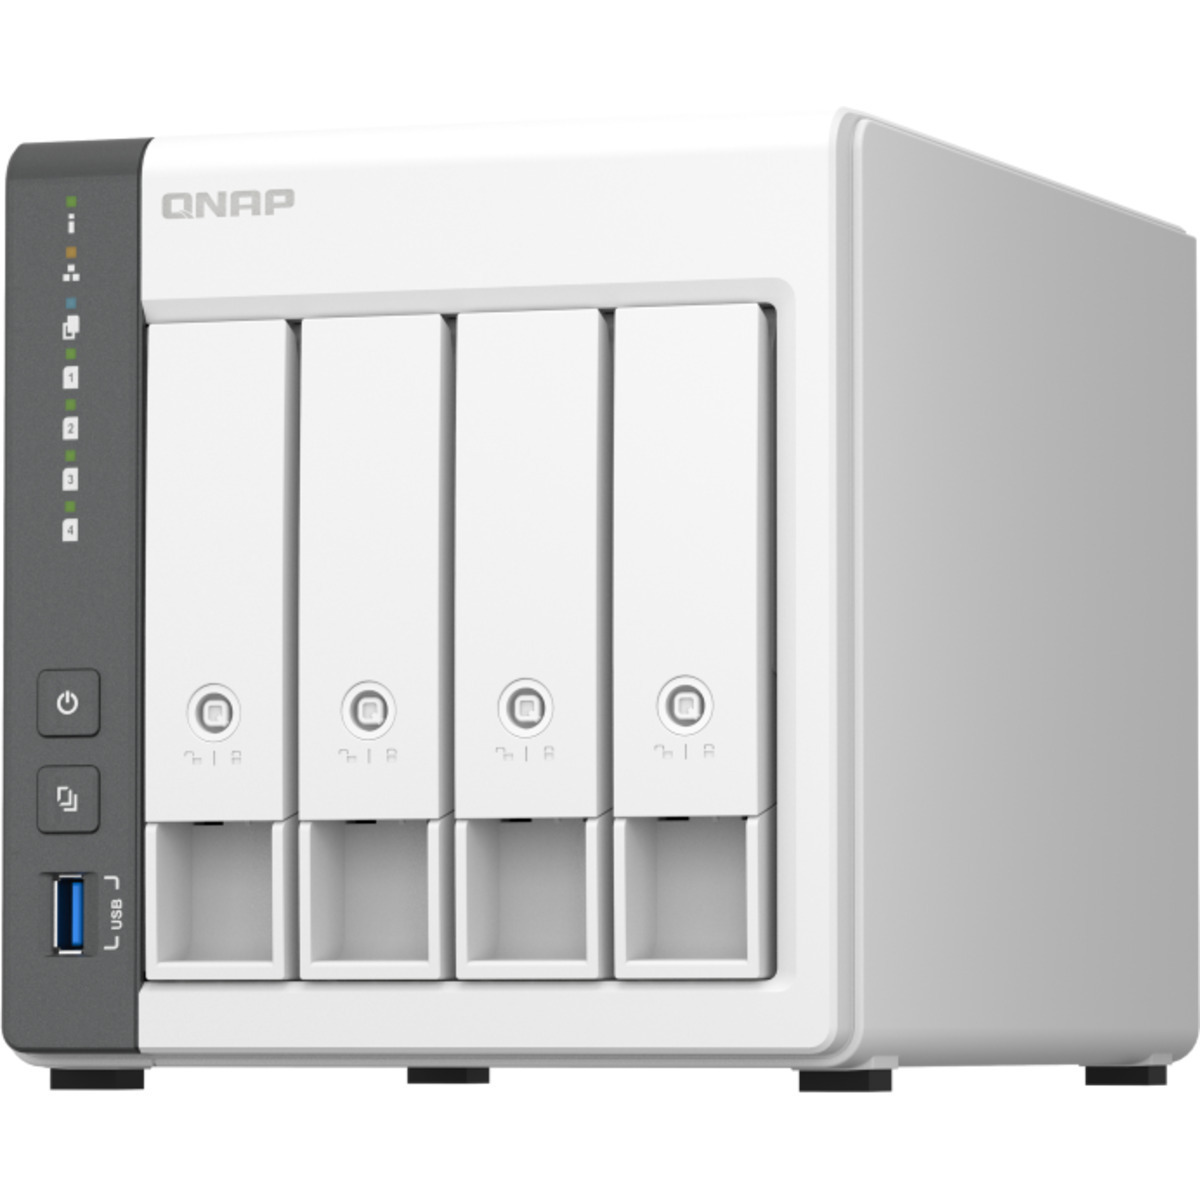 QNAP TS-433 8tb 4-Bay Desktop Personal / Basic Home / Small Office NAS - Network Attached Storage Device 2x4tb Samsung 870 QVO MZ-77Q4T0 2.5 560/530MB/s SATA 6Gb/s SSD CONSUMER Class Drives Installed - Burn-In Tested TS-433